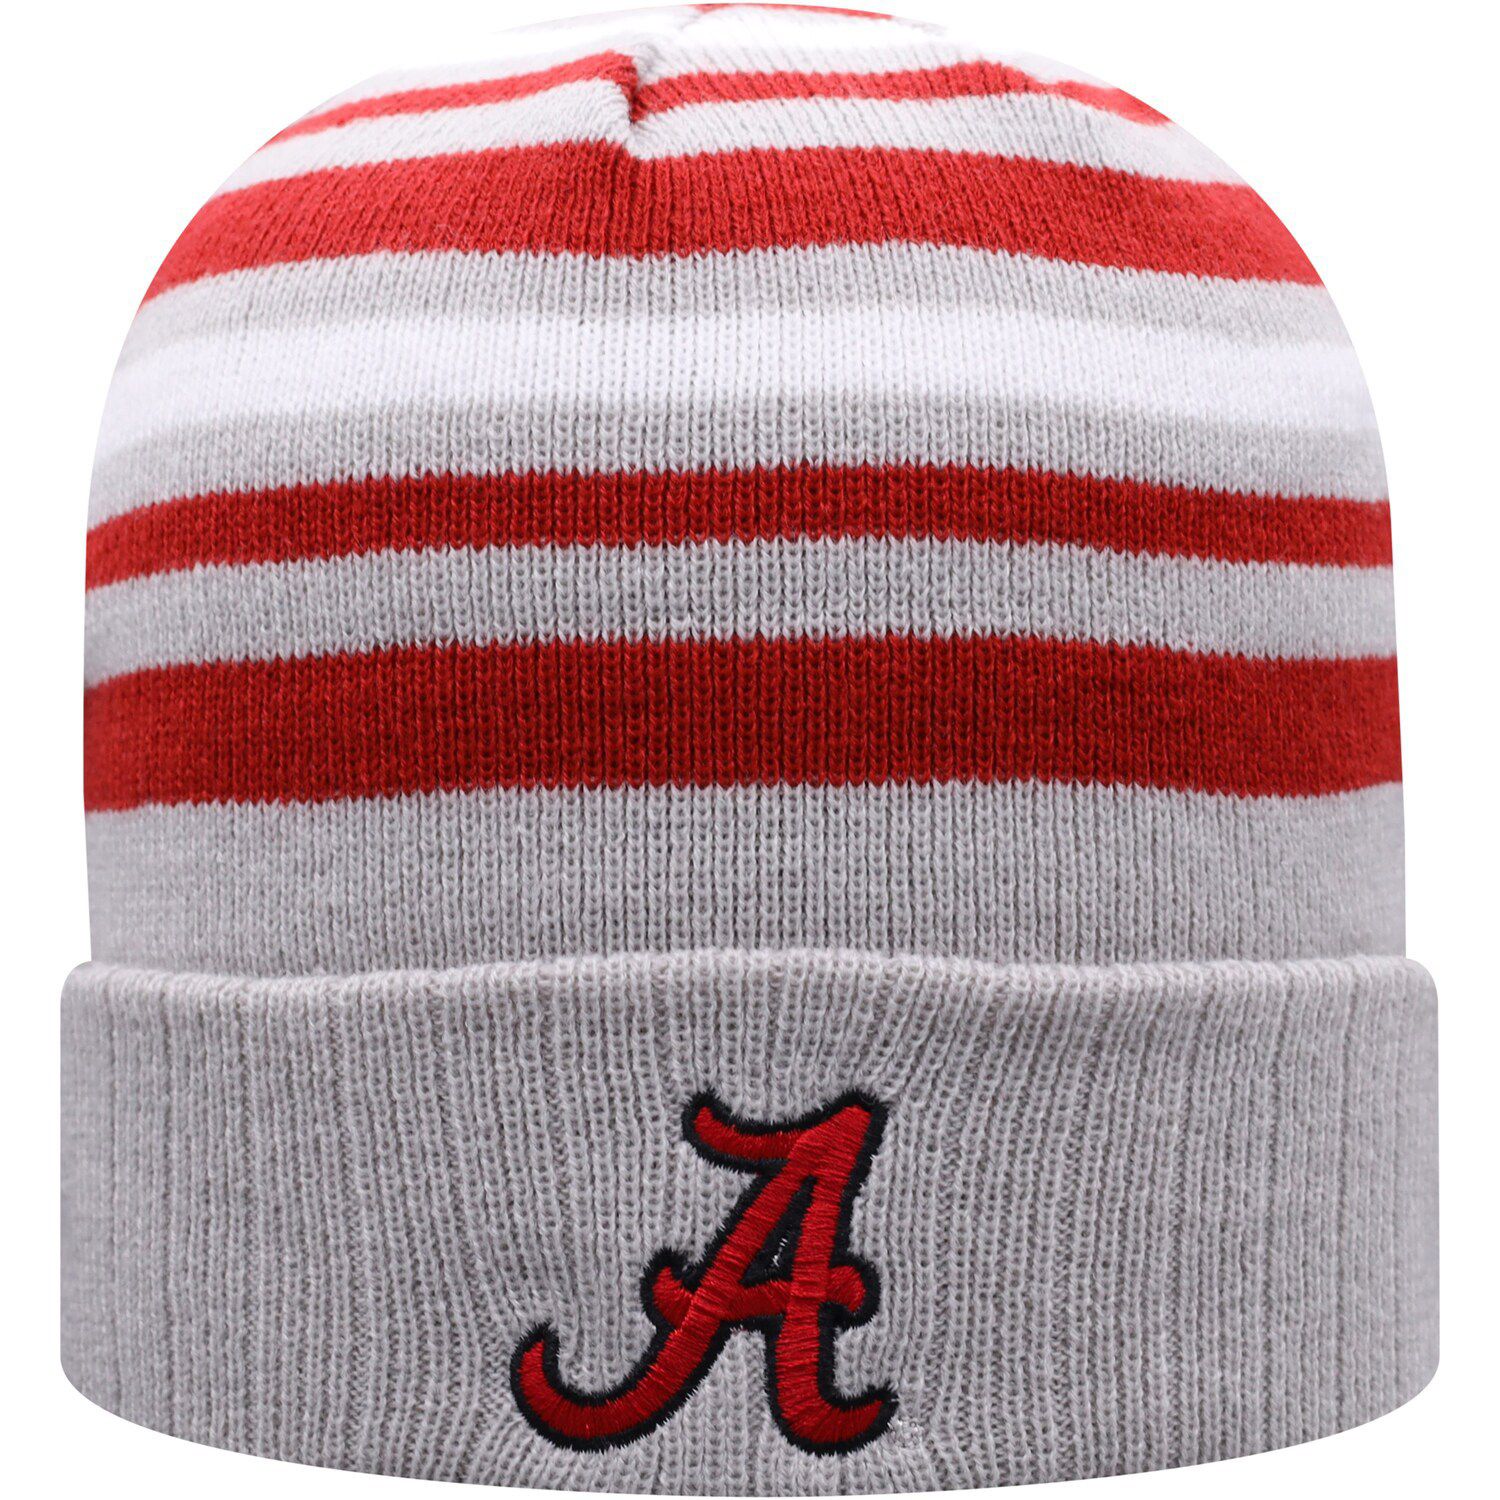 Image for Unbranded Men's Top of the World Gray/Crimson Alabama Crimson Tide All Day Cuffed Knit Hat at Kohl's.